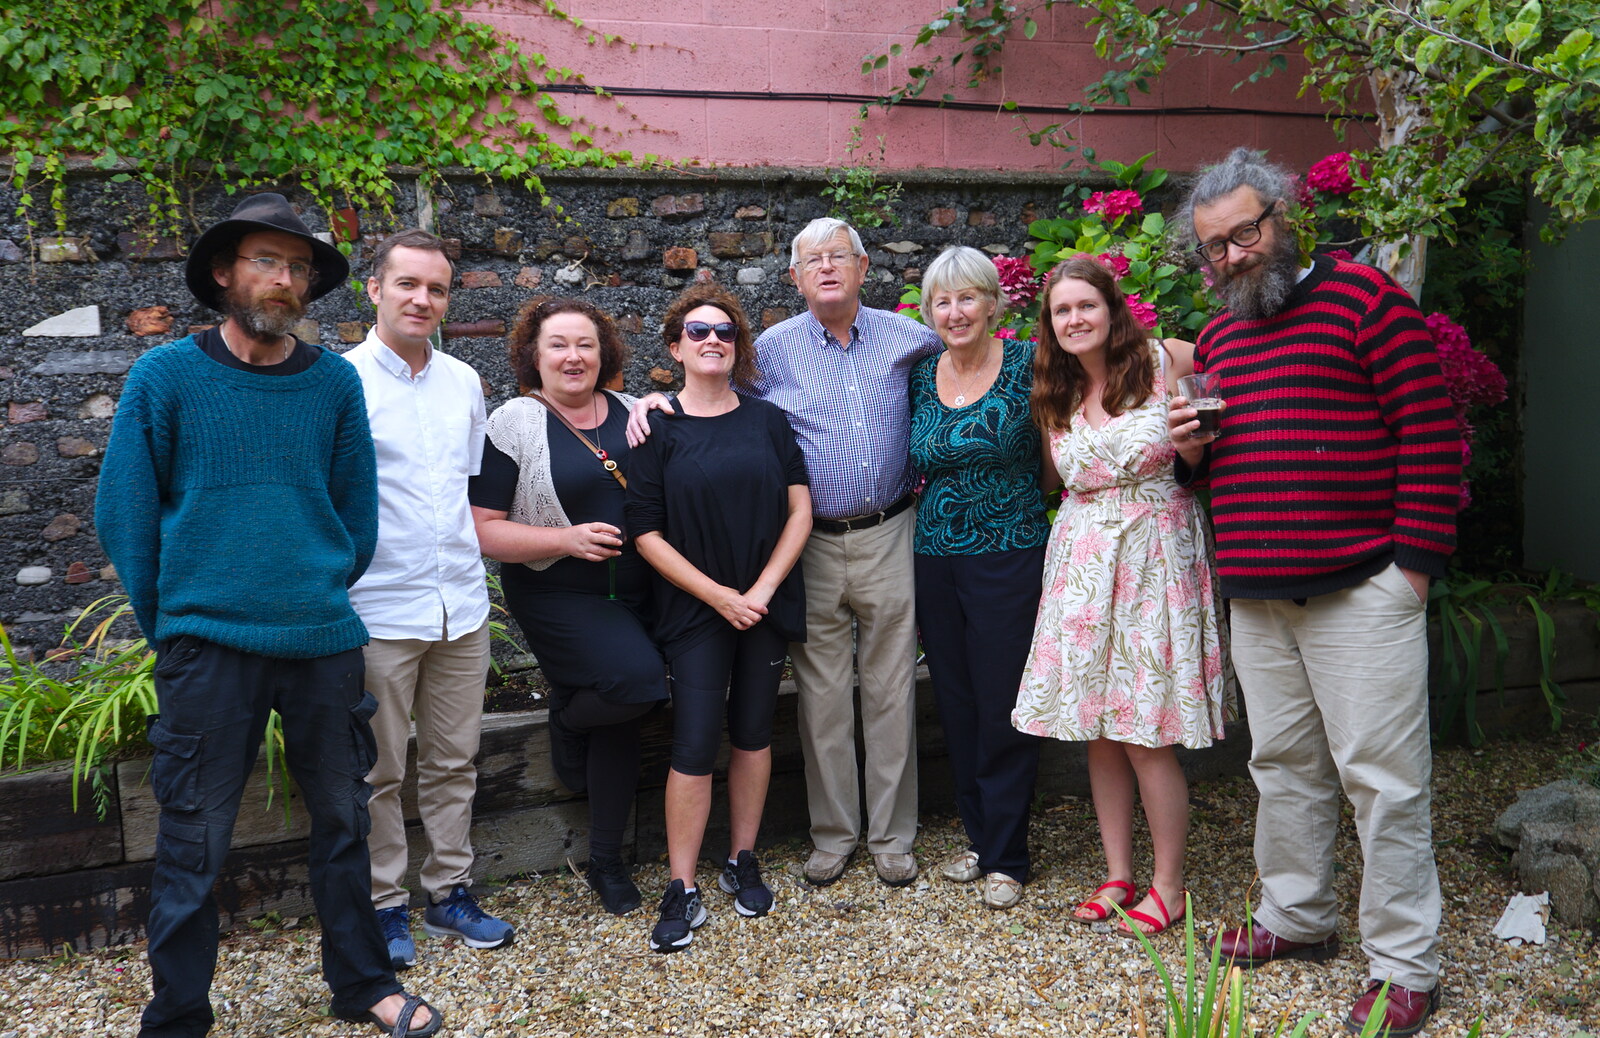 Brothers and sisters from Jimmy and Catherina's, Ballsbridge, Dublin - 10th August 2019